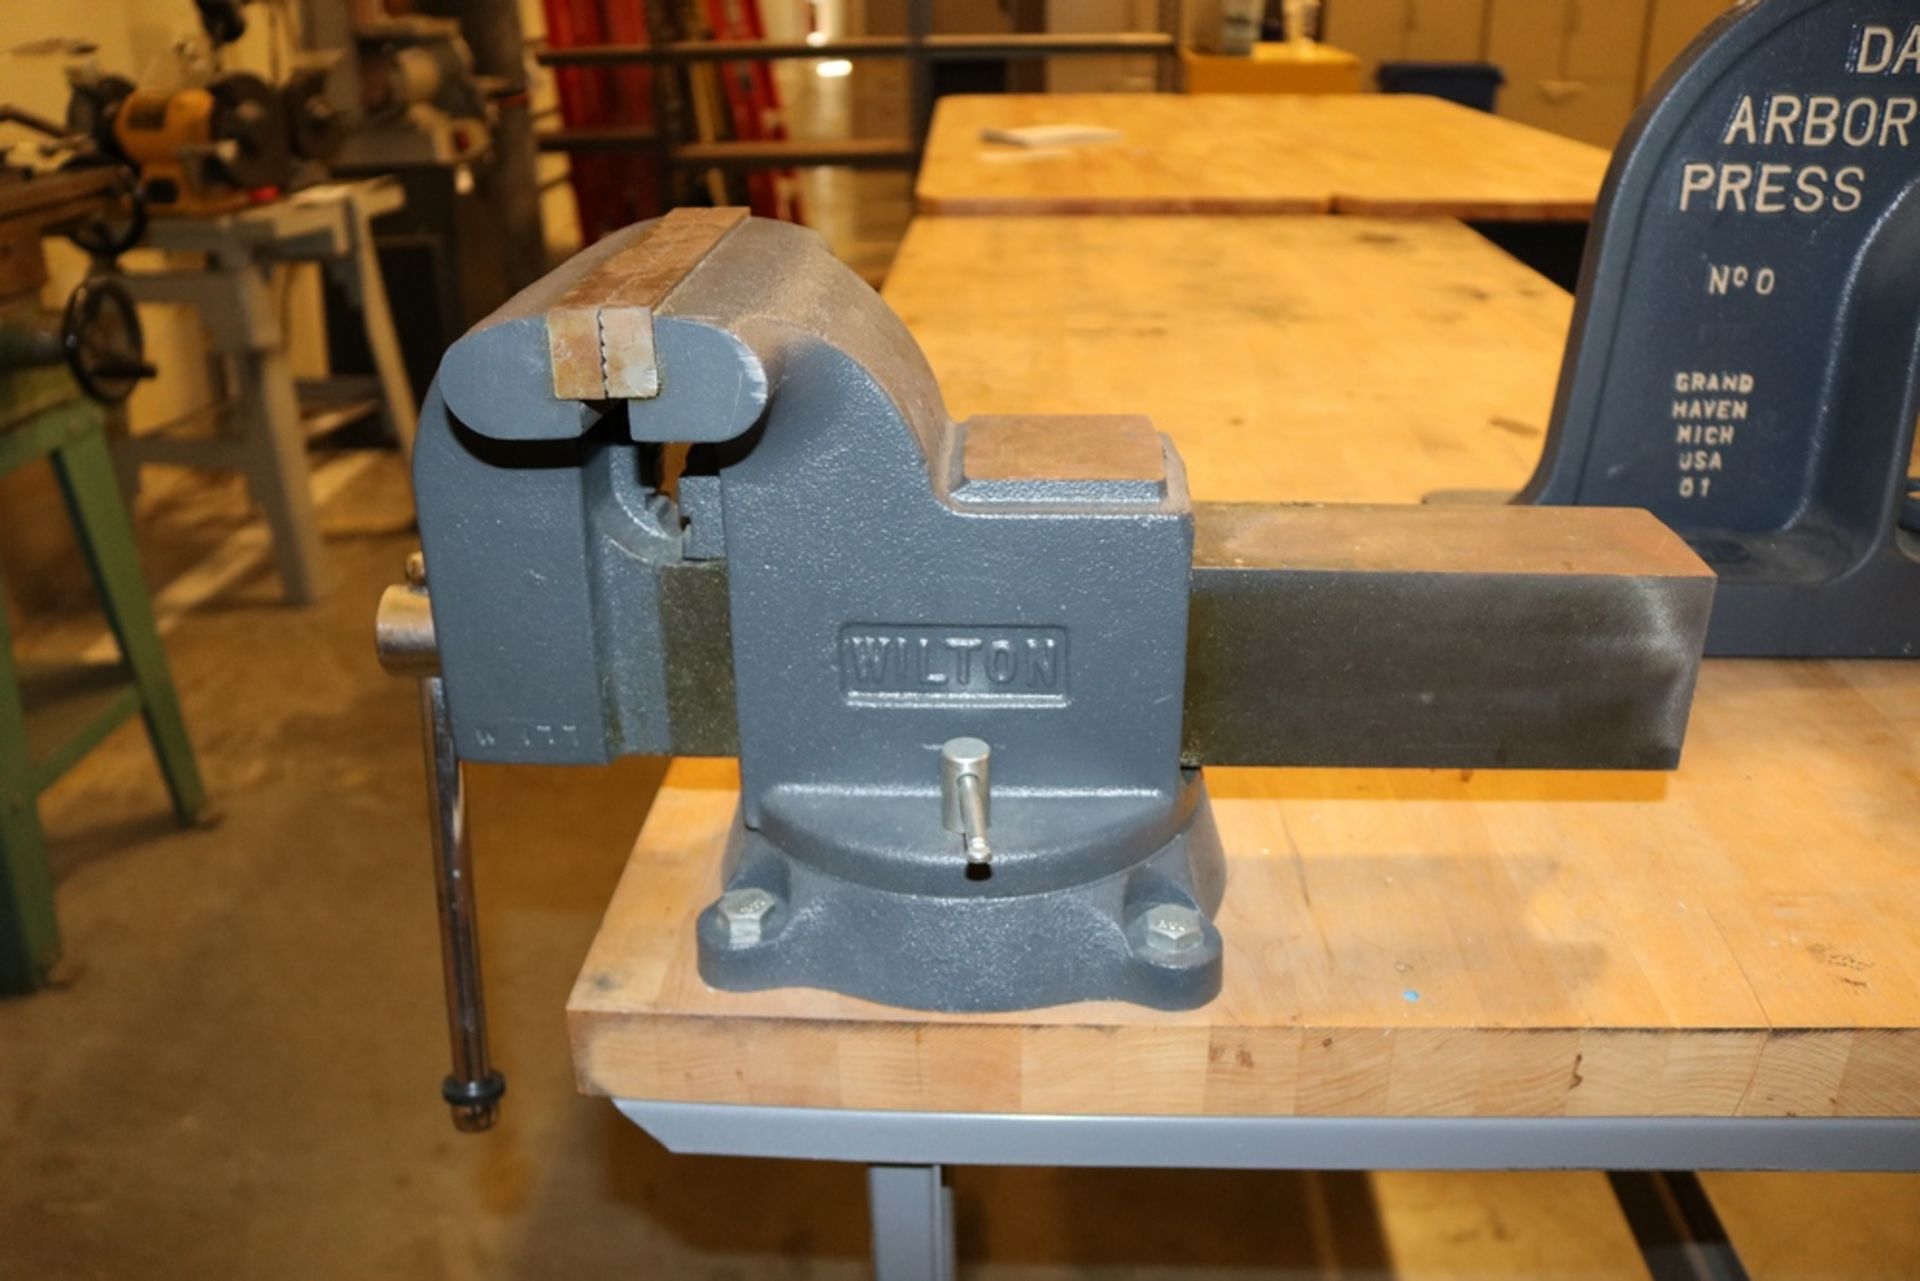 Wilton 8" Jaw Table Vice & Drake Abror Press No 0 With Wood Top Work Table 6' x 30" x 33 1/2" - Image 3 of 5